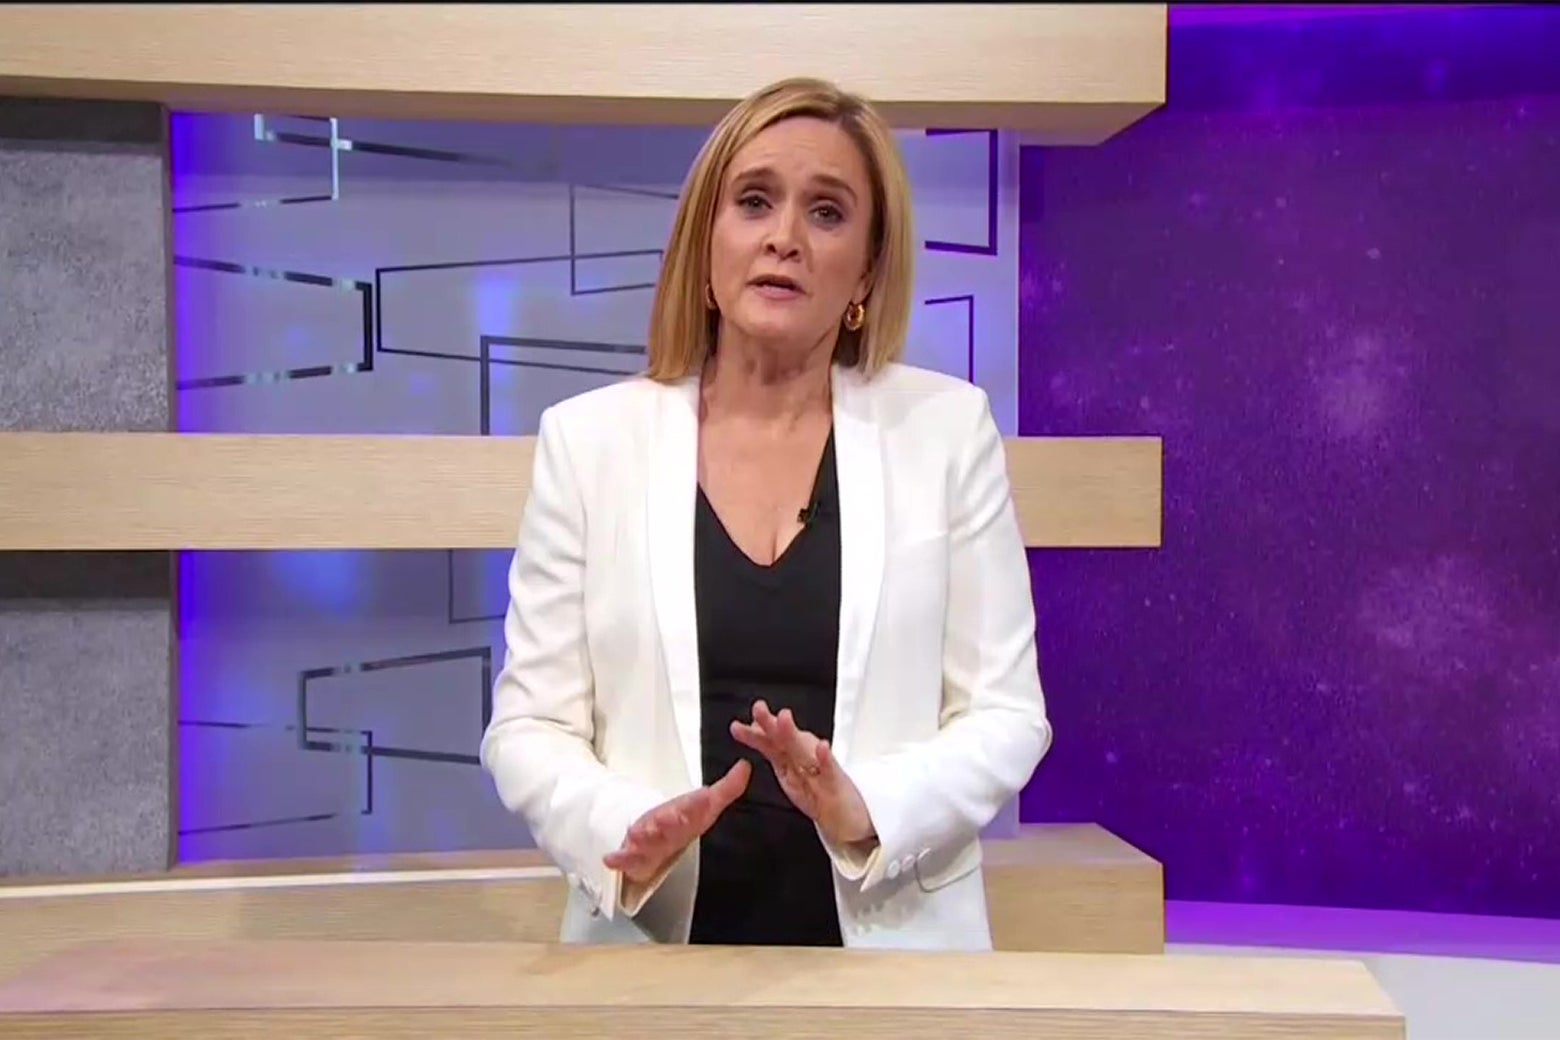 Samantha Bee on Full Frontal with Samantha Bee.